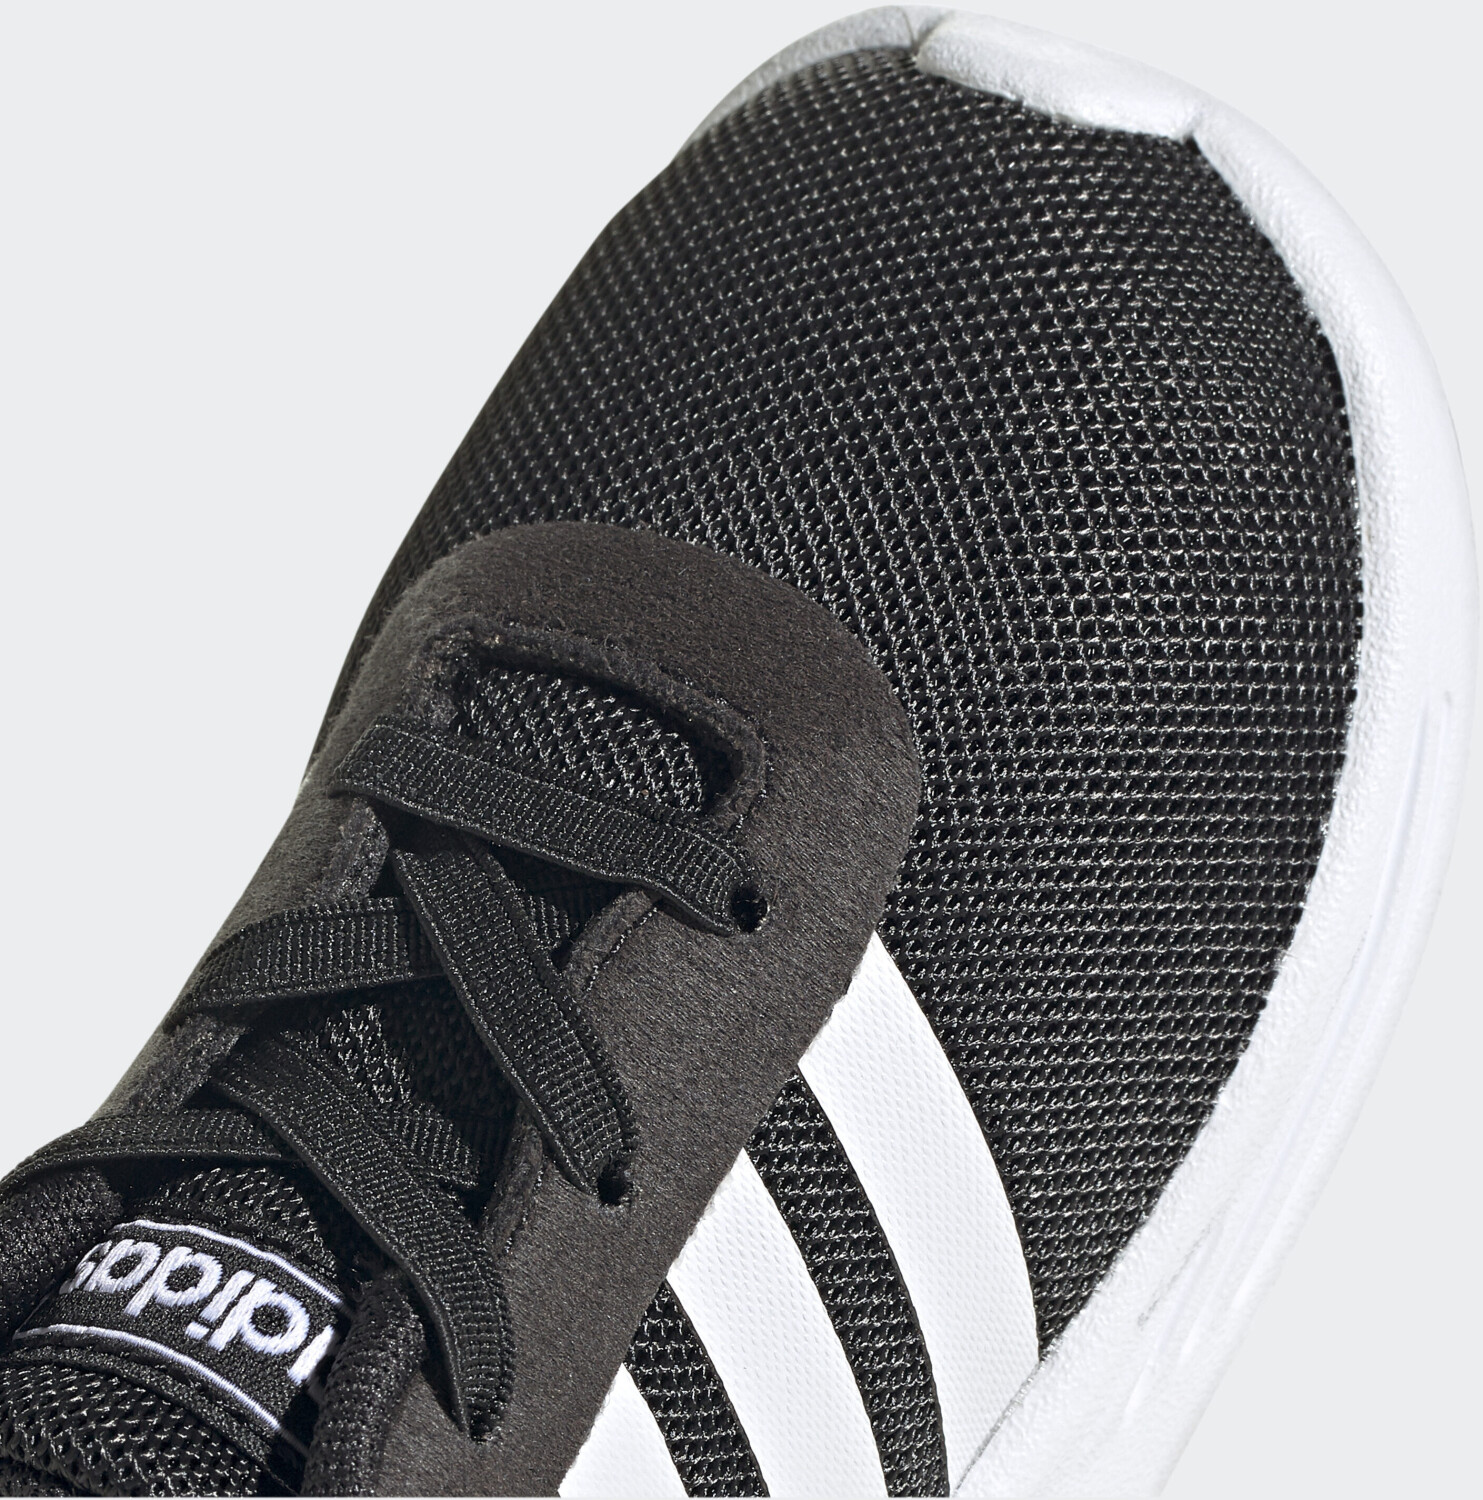 Buy Adidas Lite Racer 2.0 Core Black/Cloud White/Core Black Kinder from ...